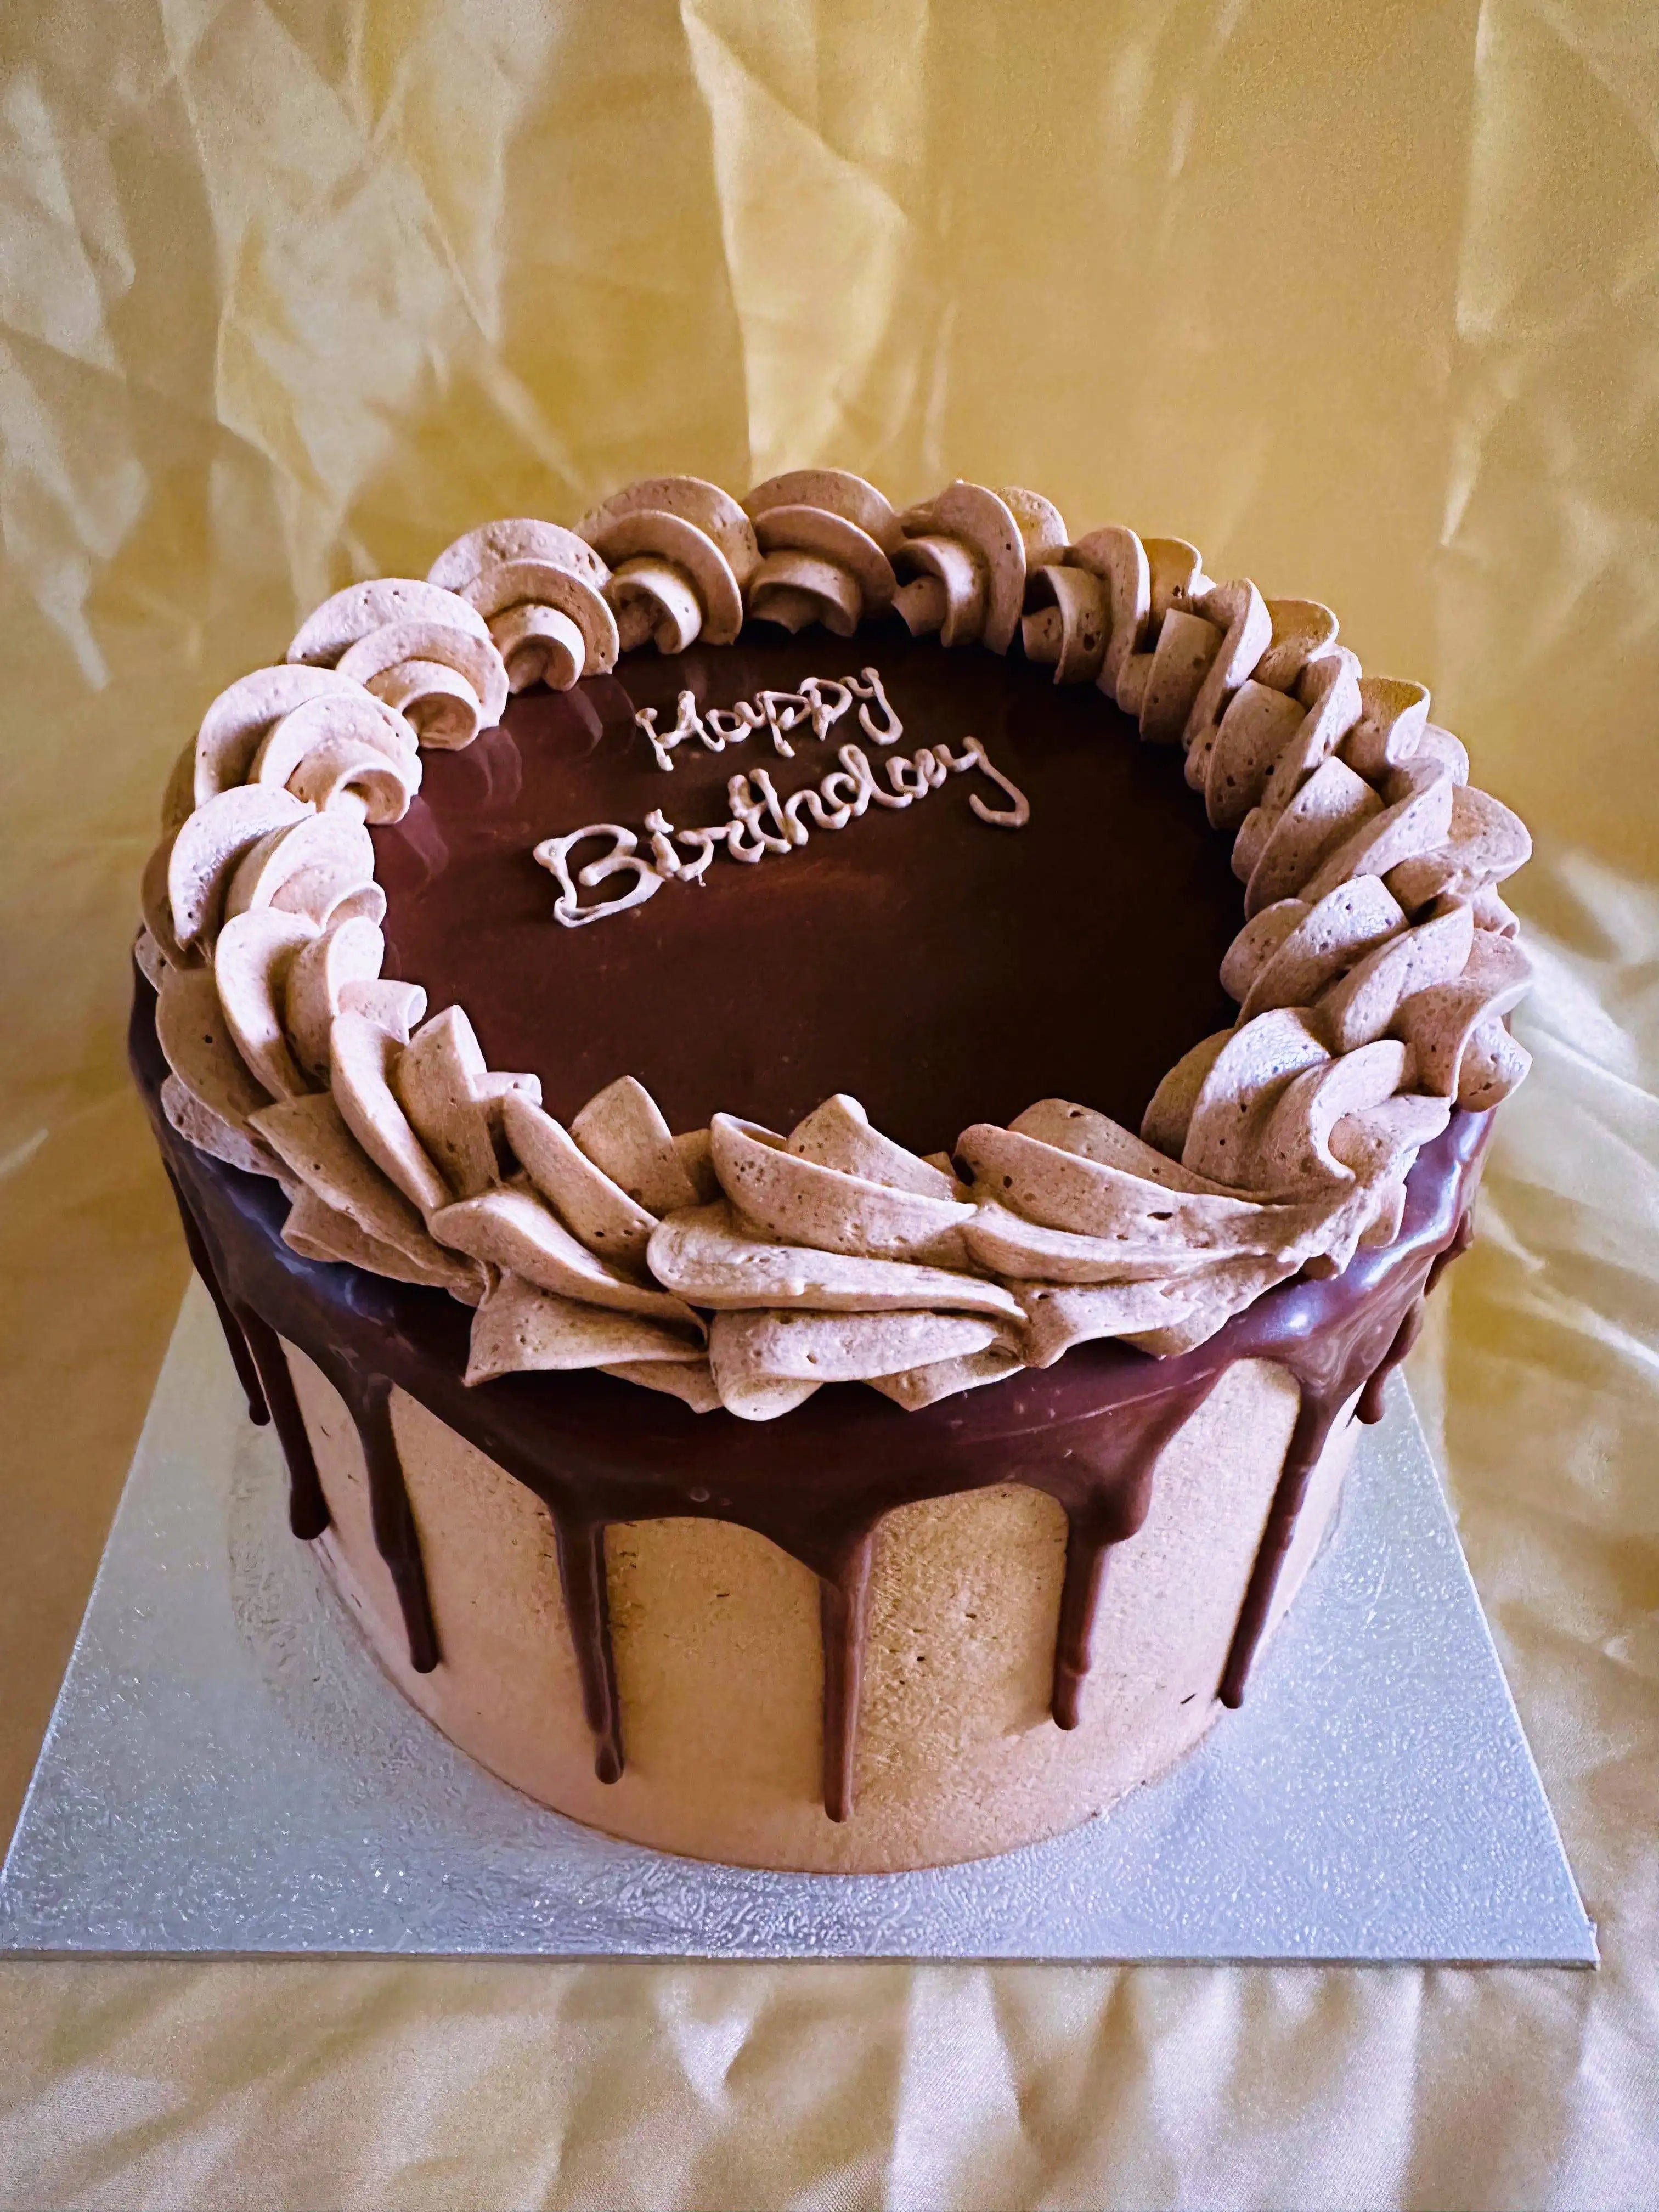 Eggless Black Forest Cake Delivery in London | Eggless Cake Shop – Cake  Walk UK Limited